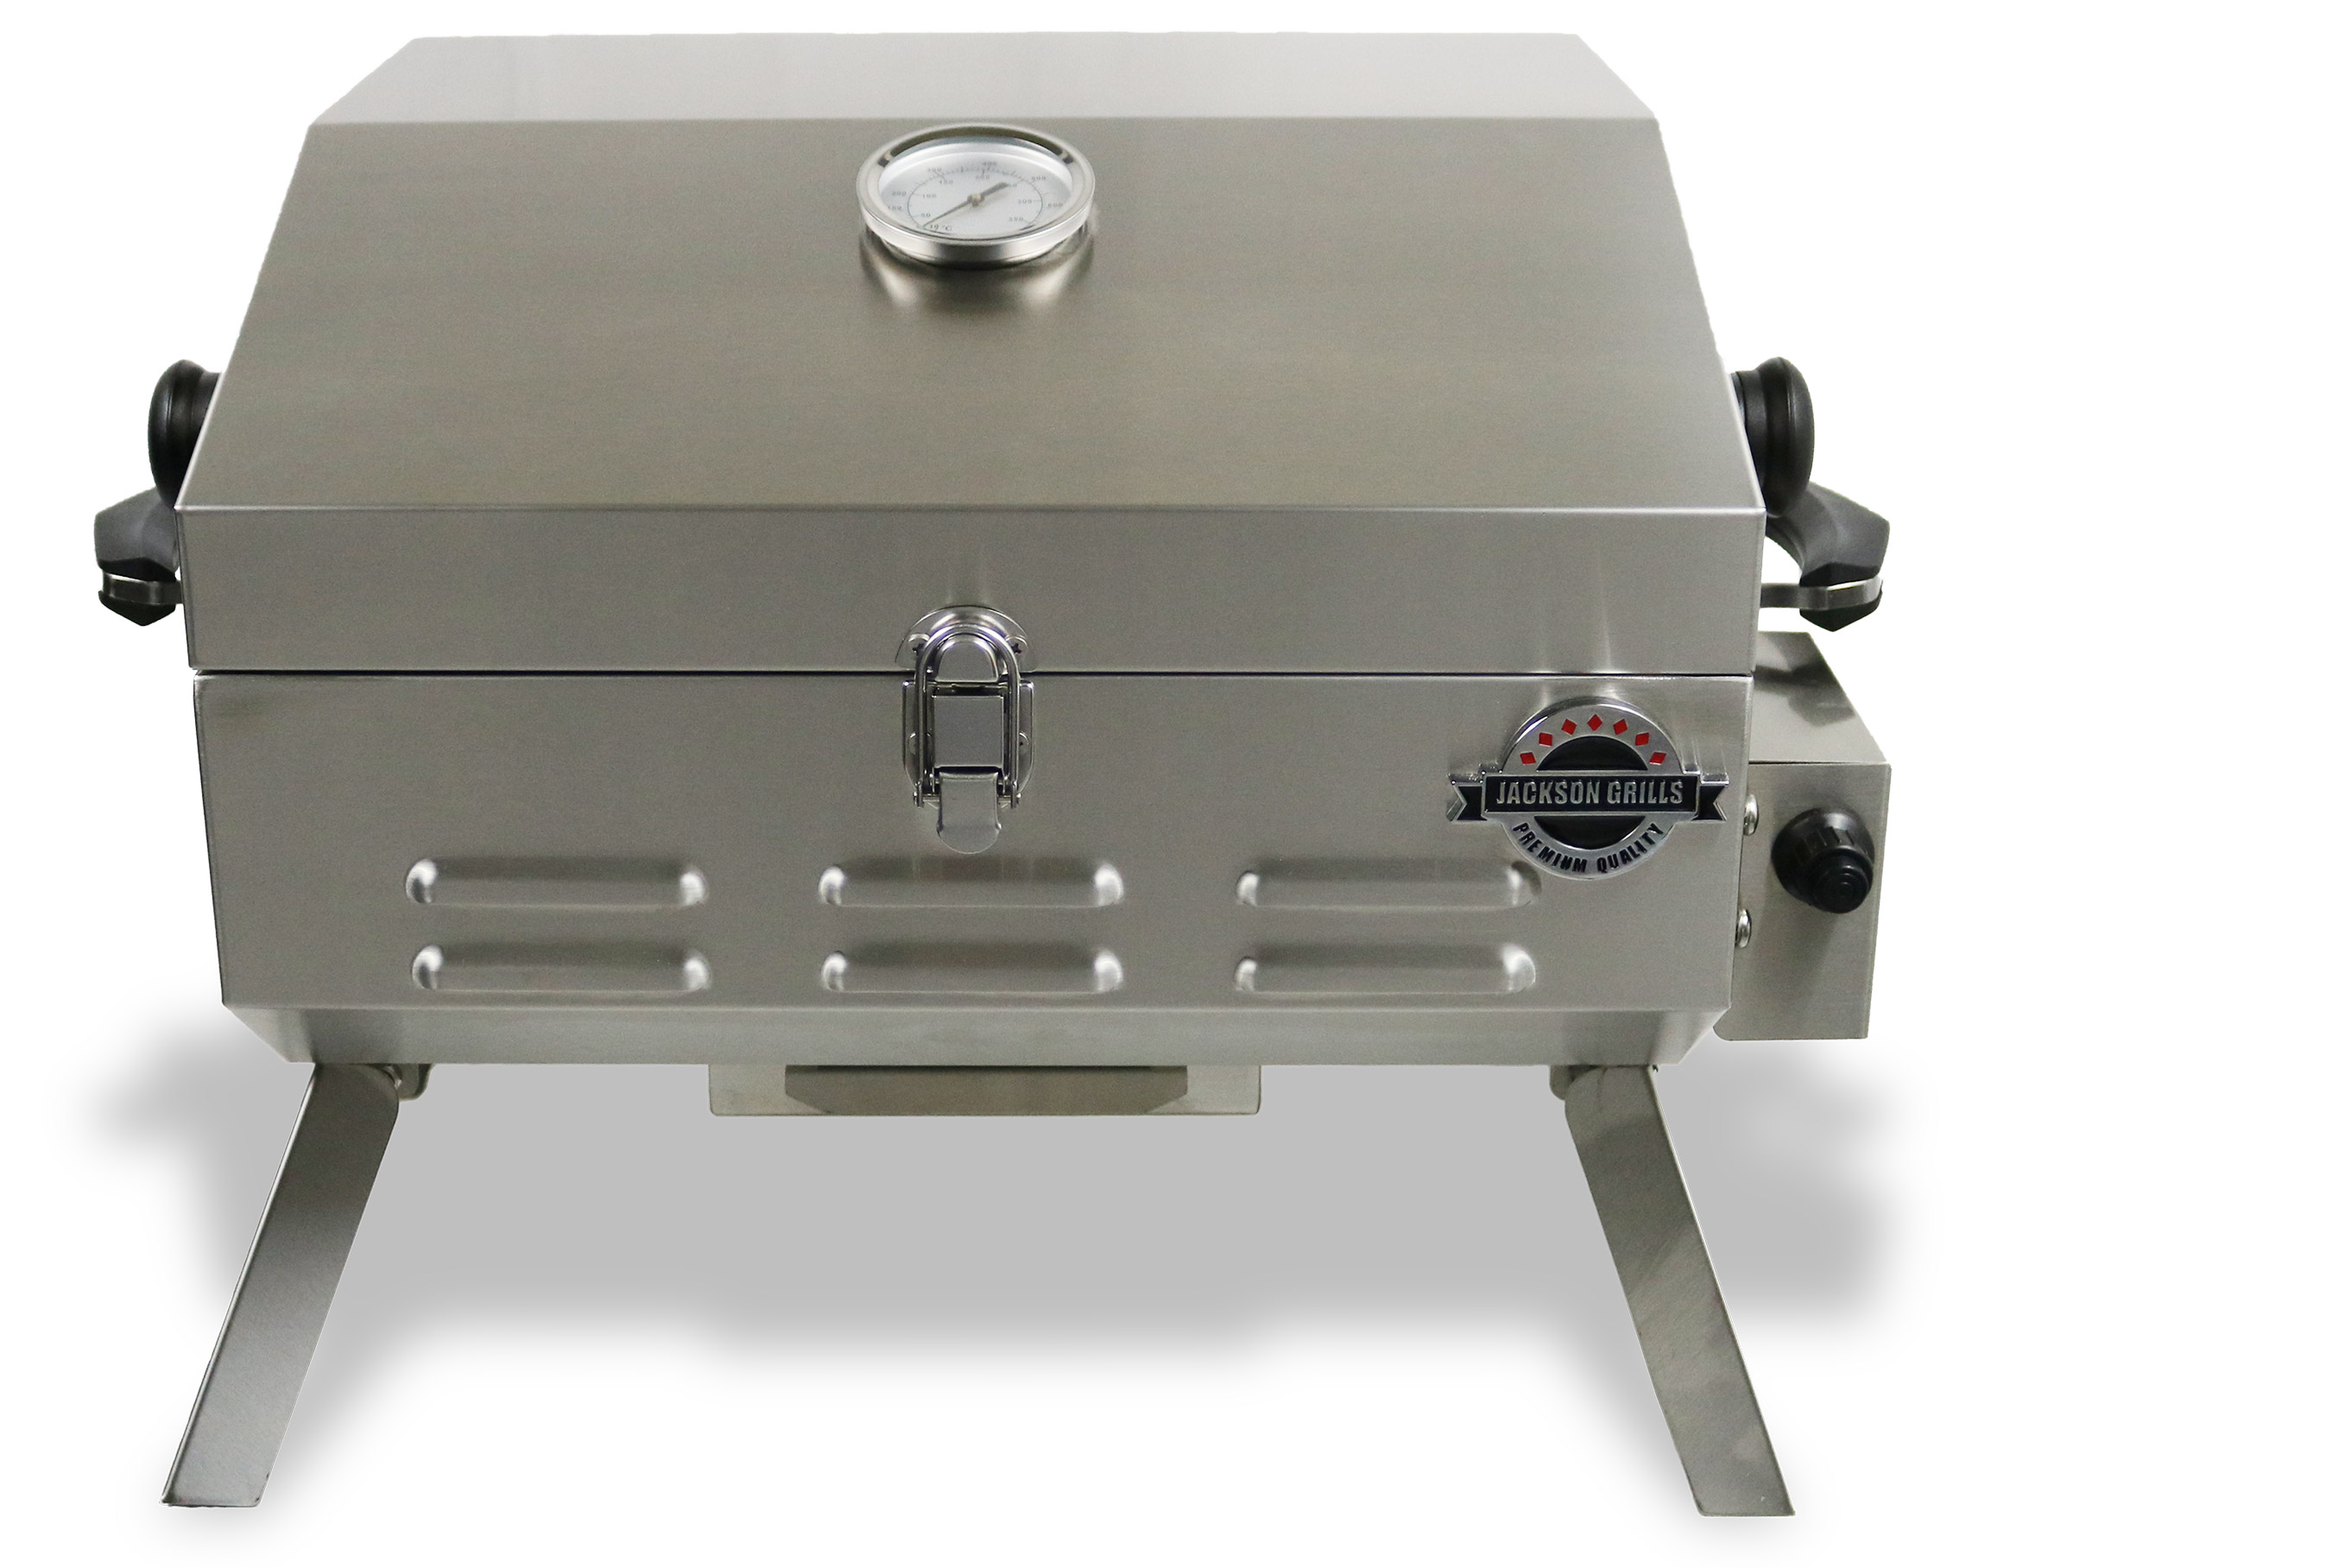 Small silver tabletop barbecue with short legs.